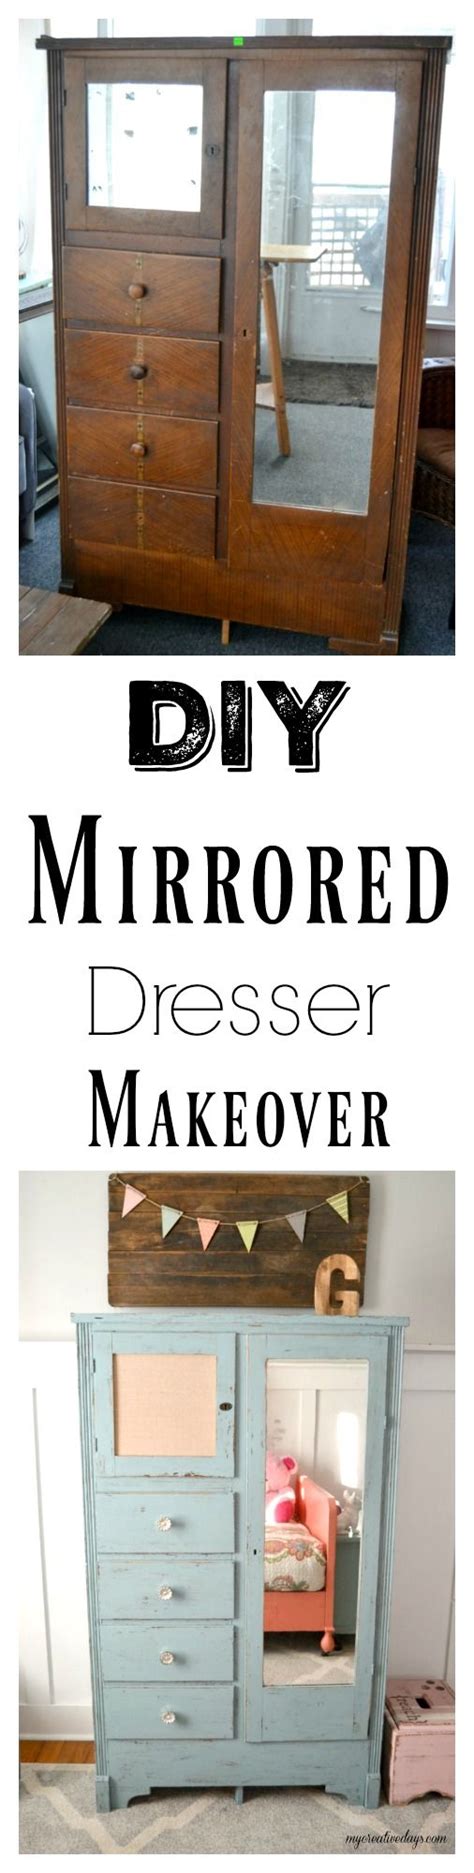 If You Have A Mirrored Dresser That Has Lost Its Luster Click Over To